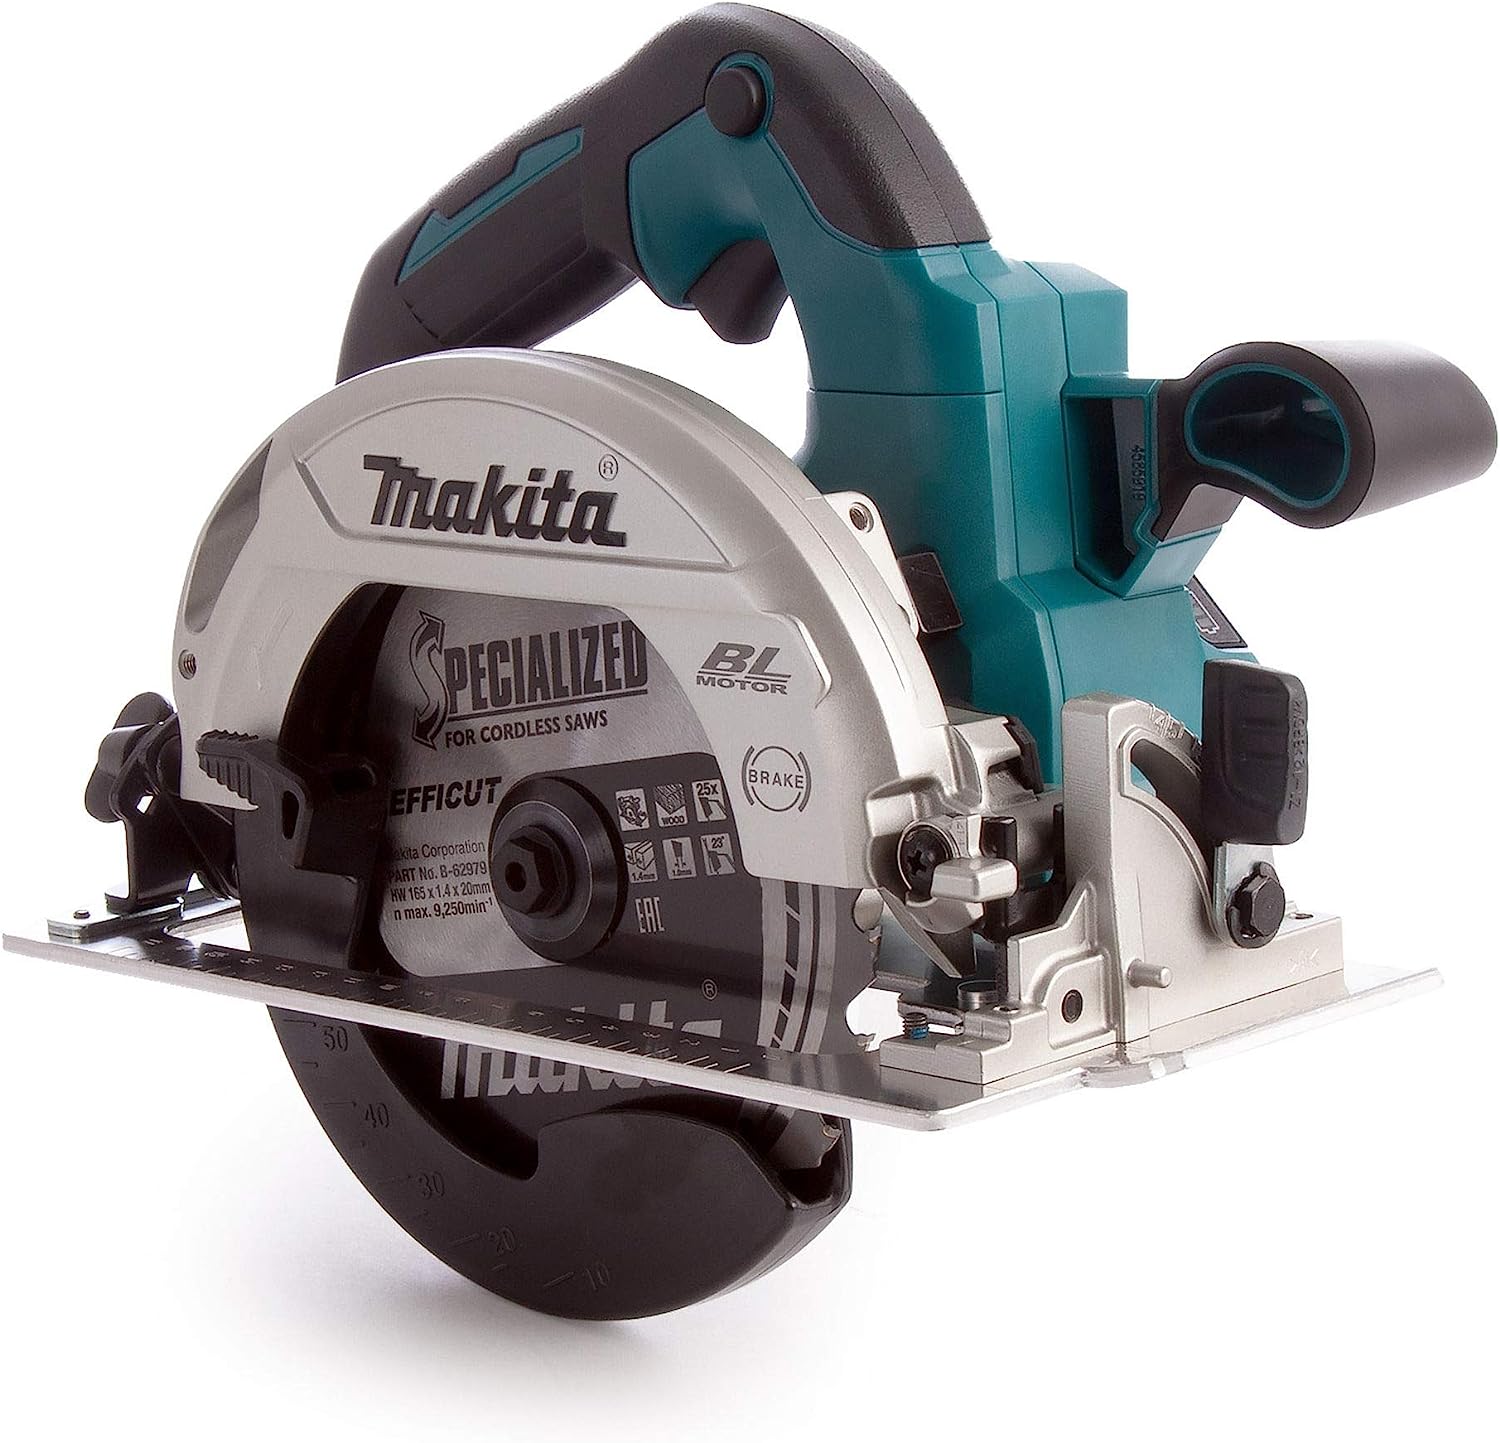 Makita DHS661ZU 18V Li-Ion LXT Brushless 165mm Circular Saw - Compact and powerful saw with brushless motor, ideal for various trades. Features Auto-start Wireless System (AWS) for on-demand dust extraction. Offers optimal rpm to torque ratio for fast cuts in light or hard applications. Includes LED job light, soft start, and rear-facing exhaust port. Easy to read scale markings for precise adjustments. Technical specifications: Voltage: 18V, Blade Diameter: 165mm, Max Cutting Capacity at 0°: 57mm, Max Cutt